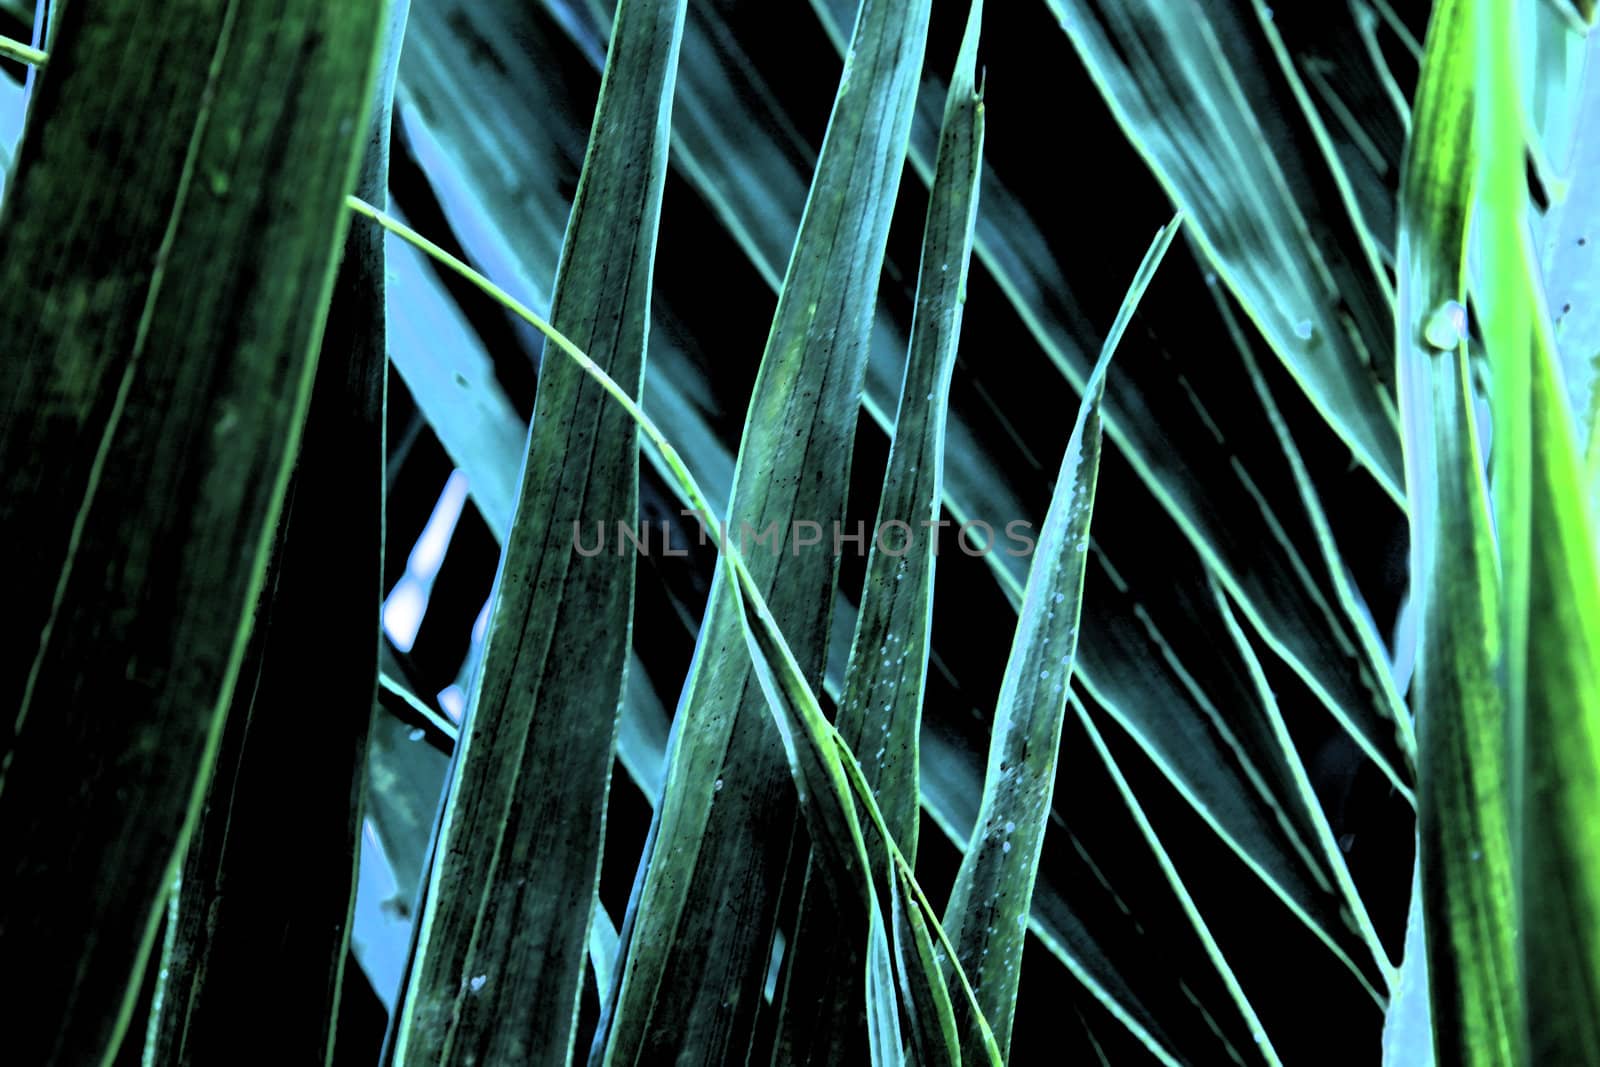 Close-up of green blades of grass with a water droplet.
